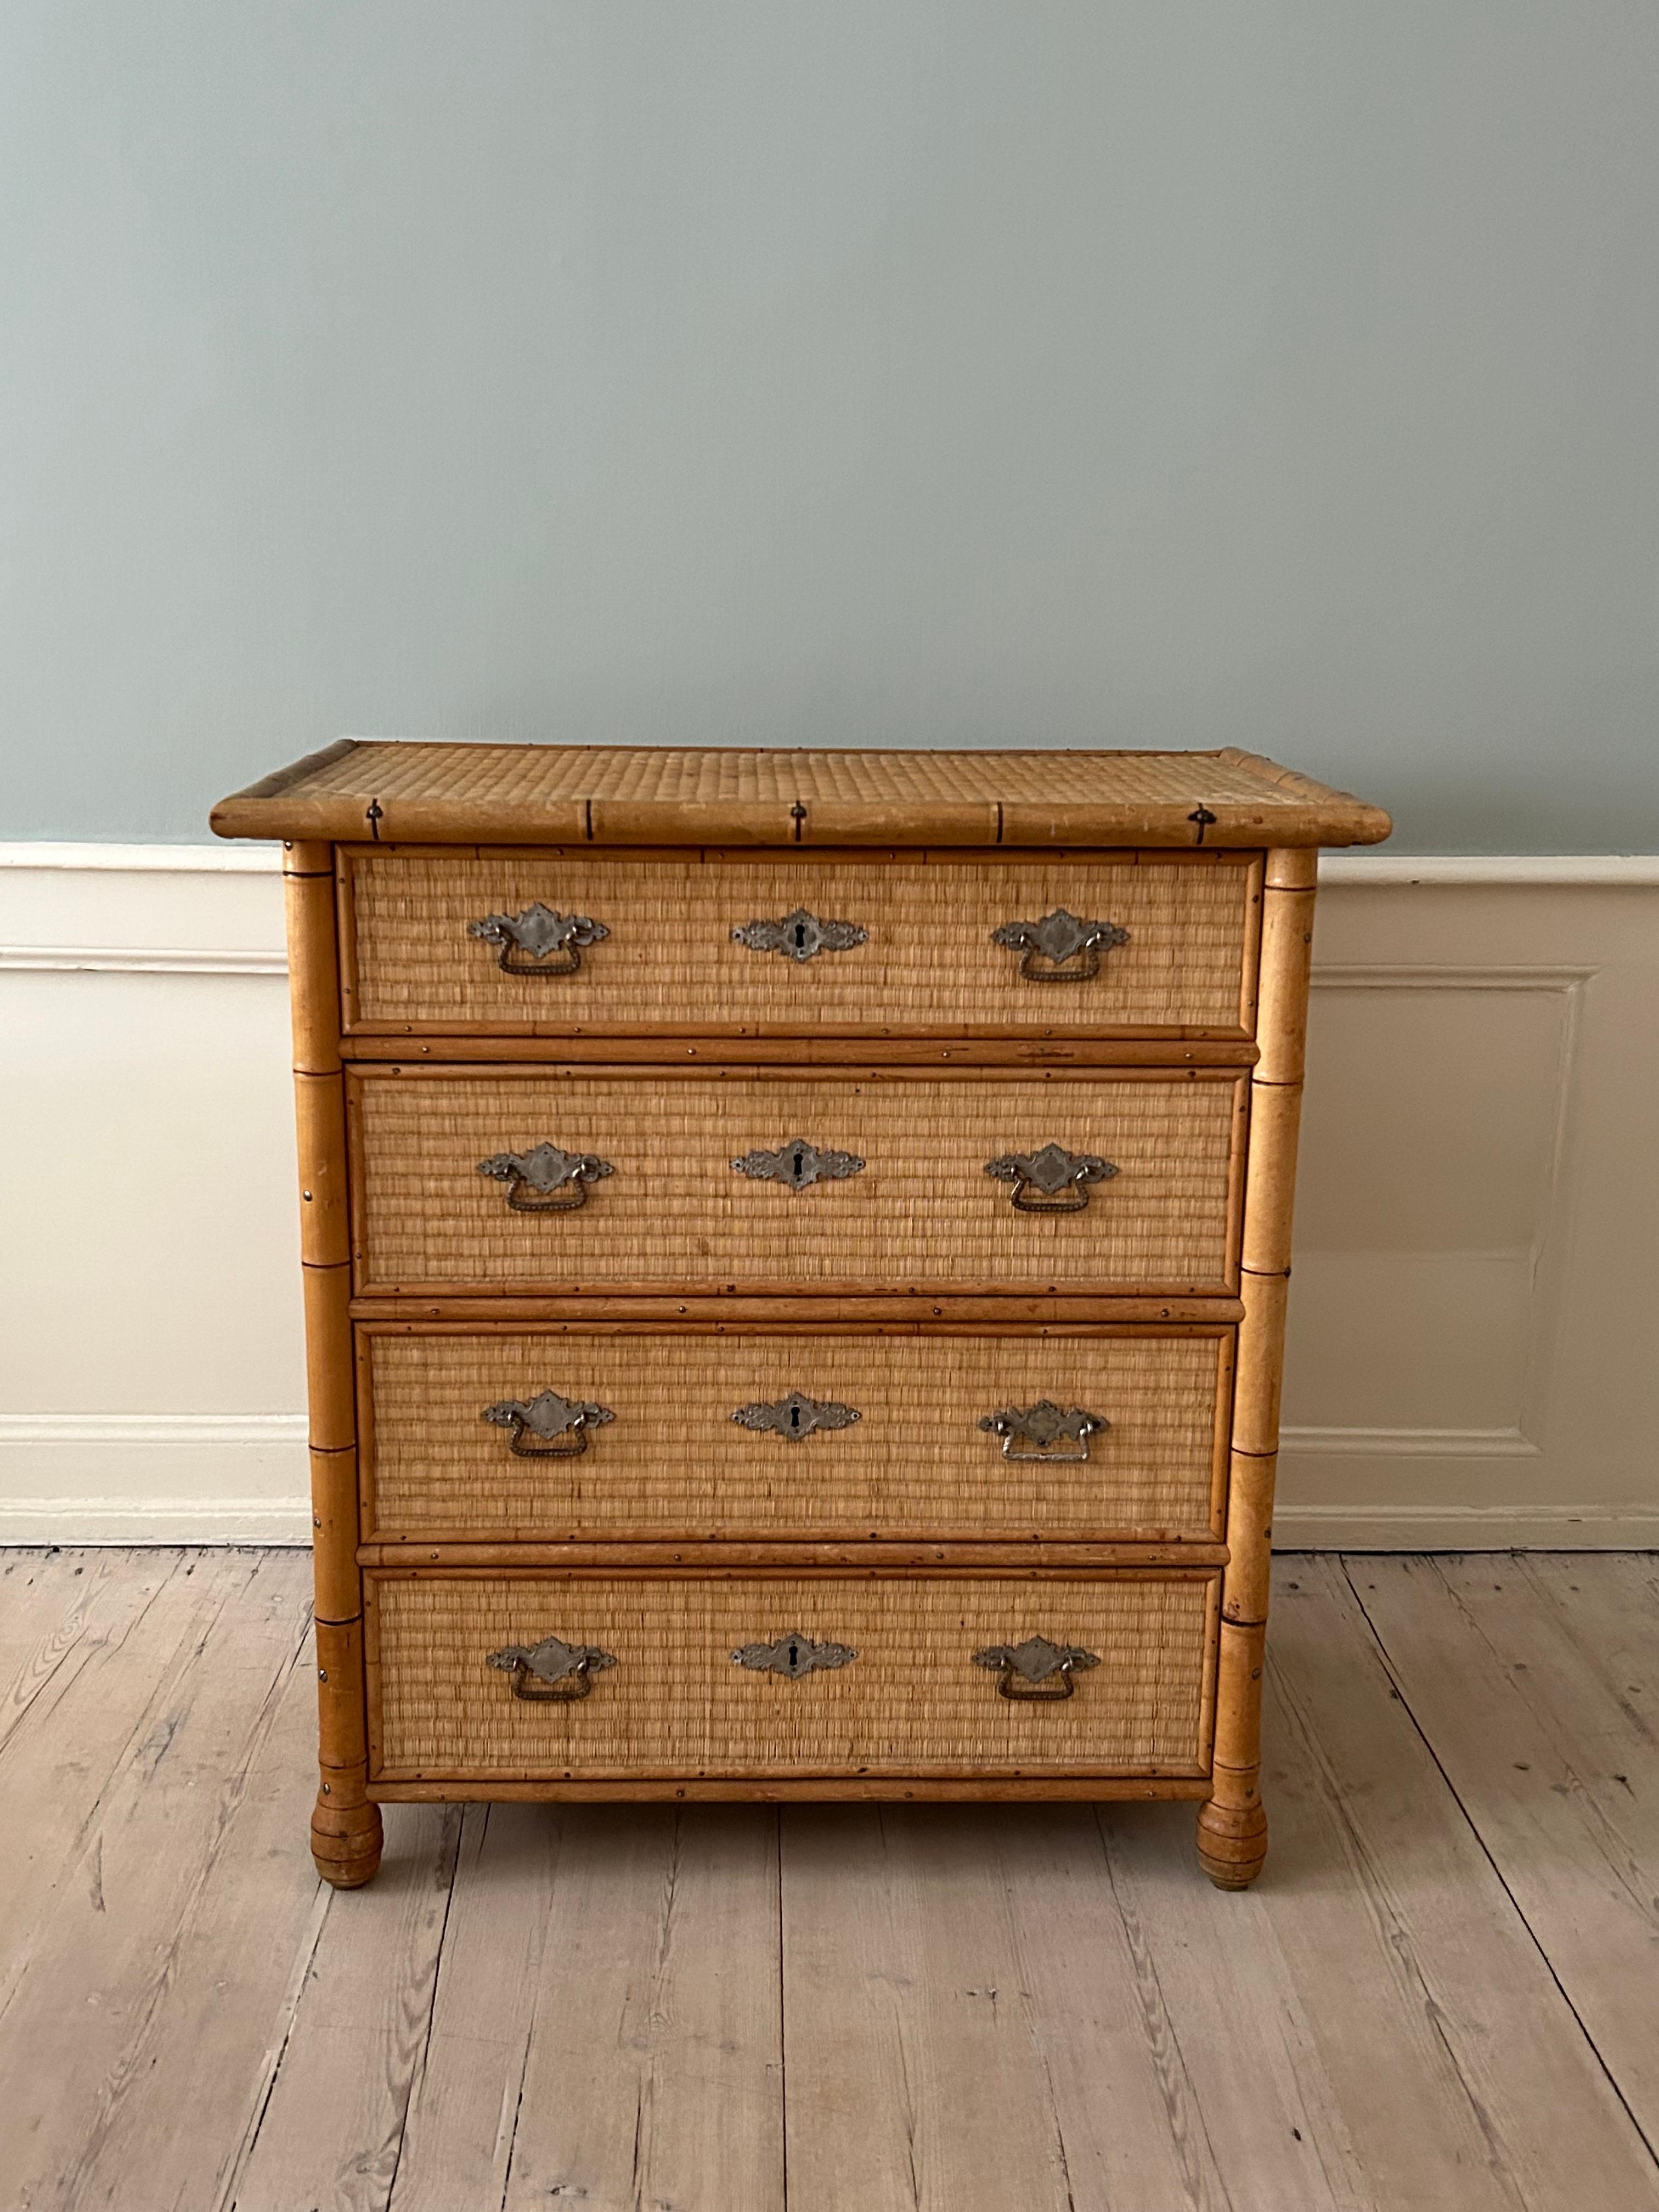 Antique Chest of Drawers in Japanese Straw and Beech Wood, Sweden, 19th Century For Sale 1